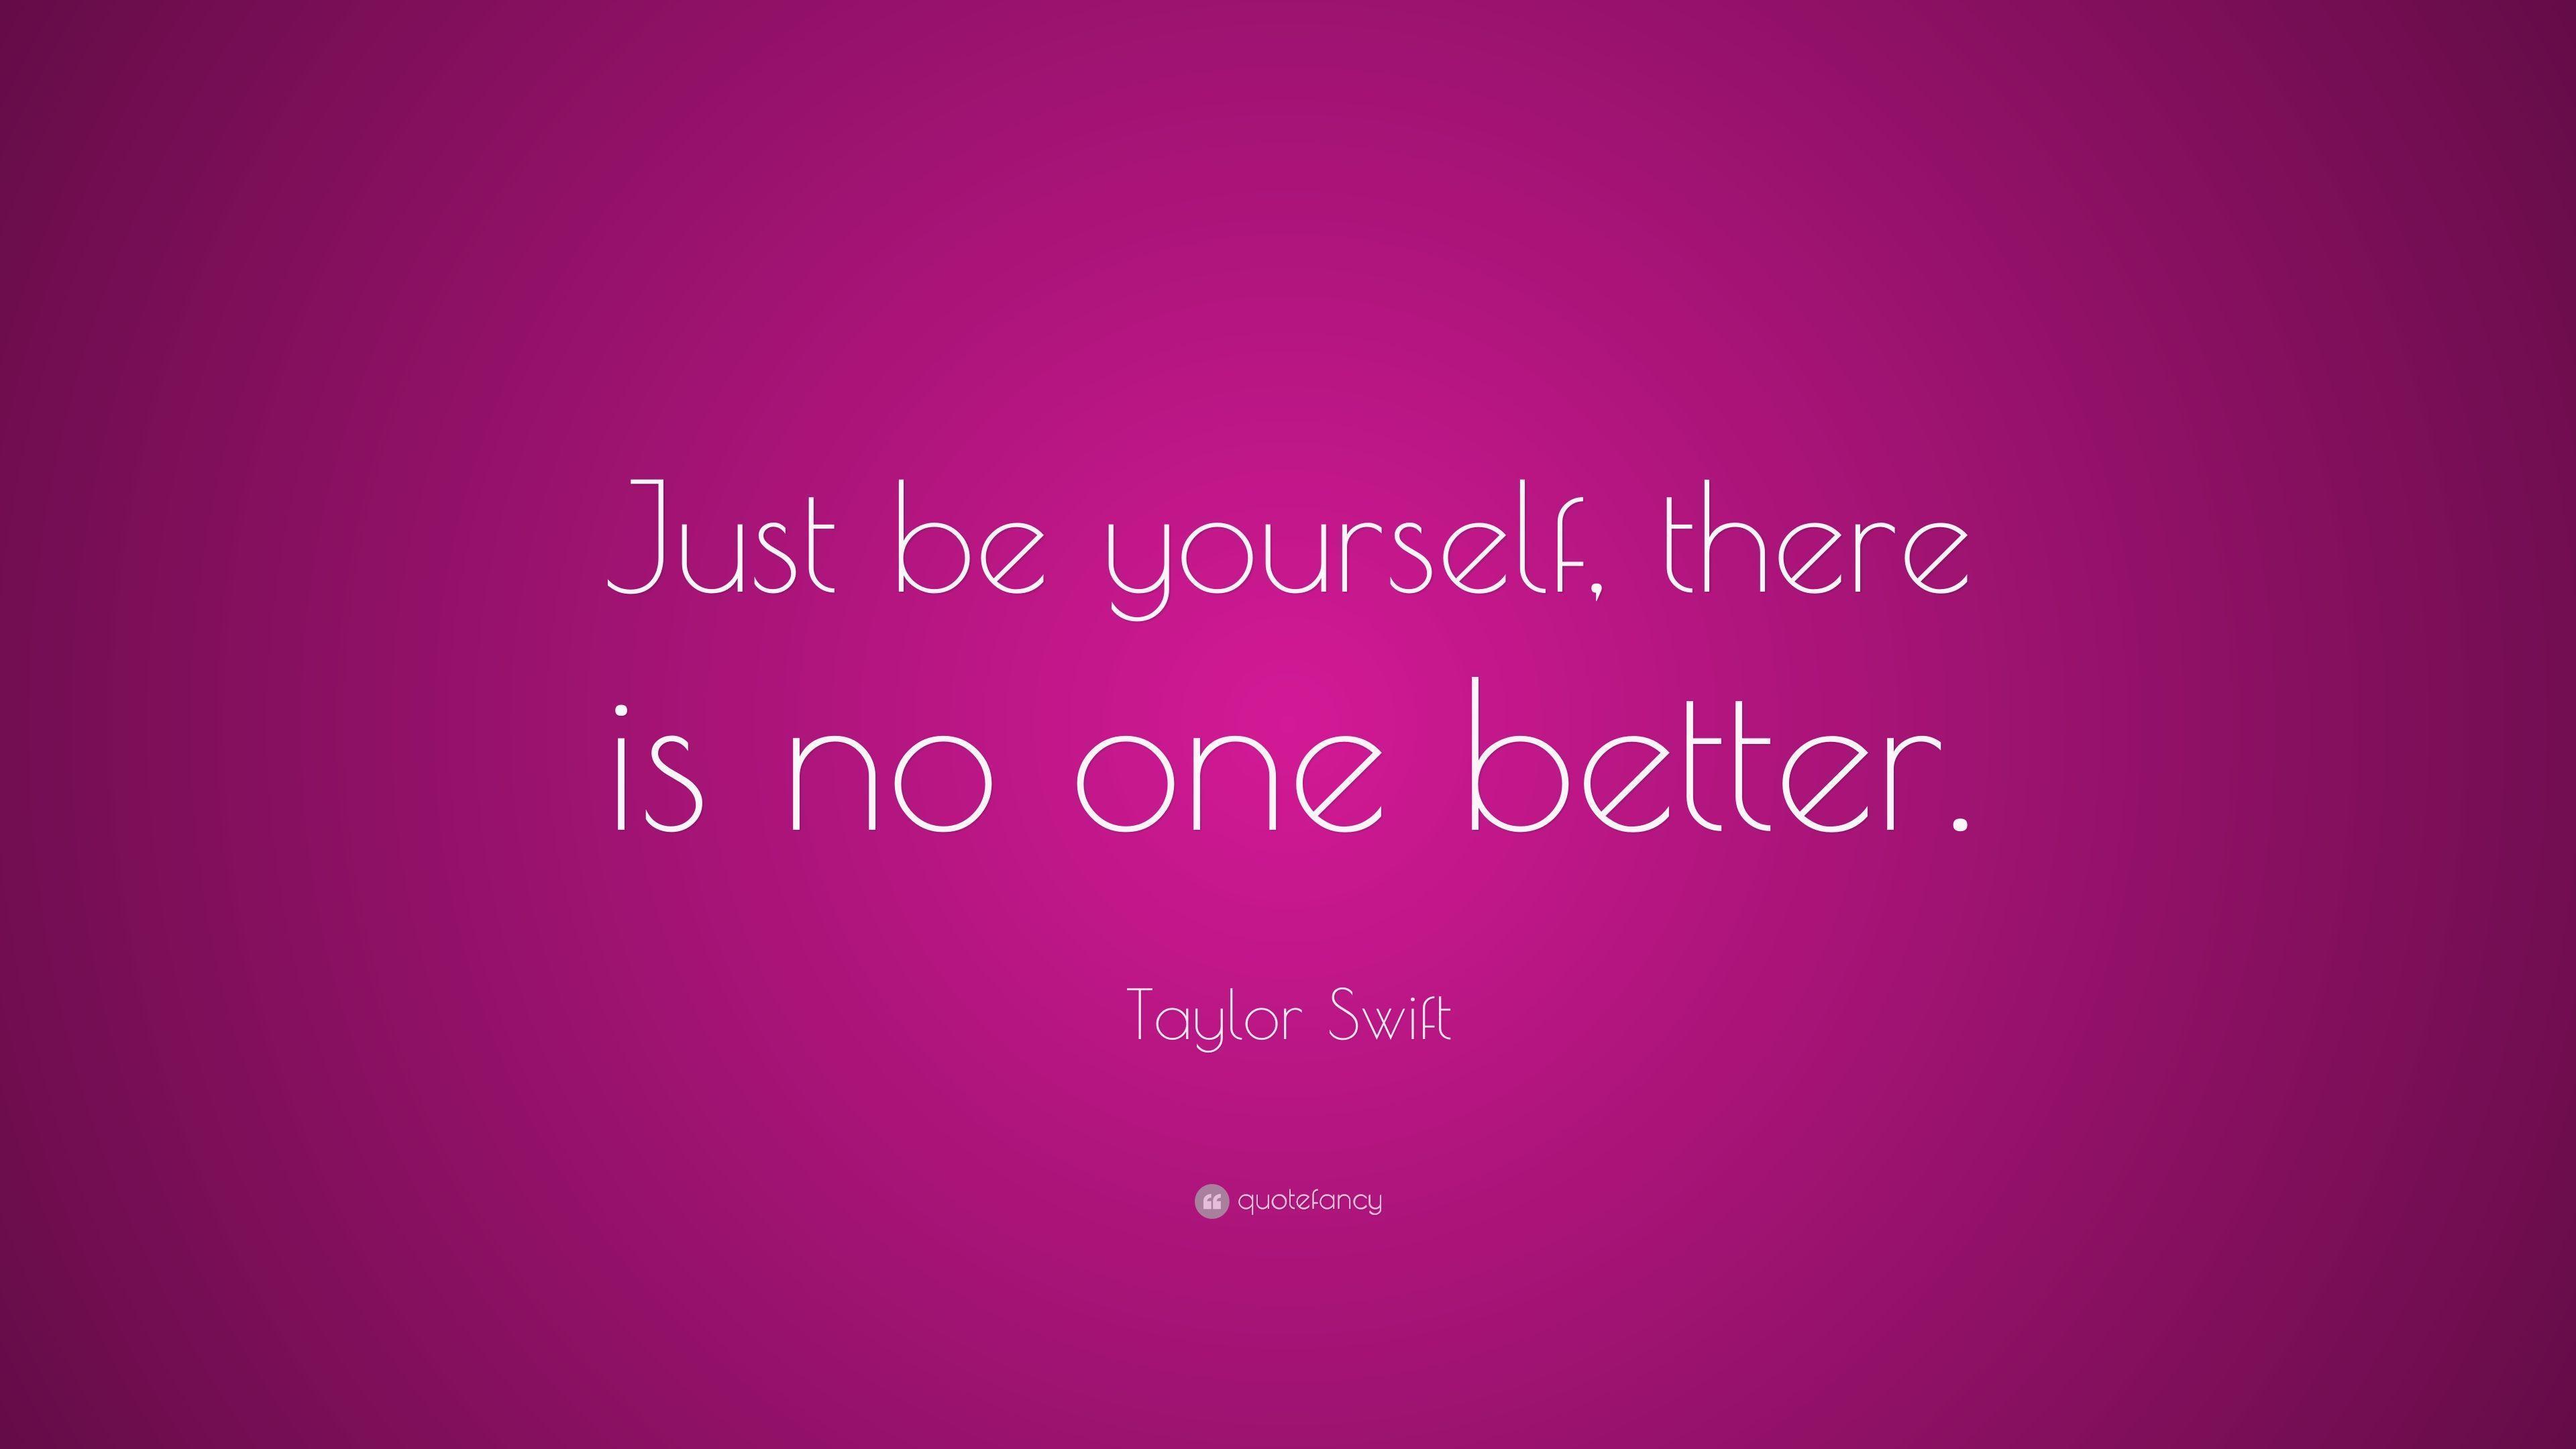 Taylor Swift Quote: “Just be yourself, there is no one better